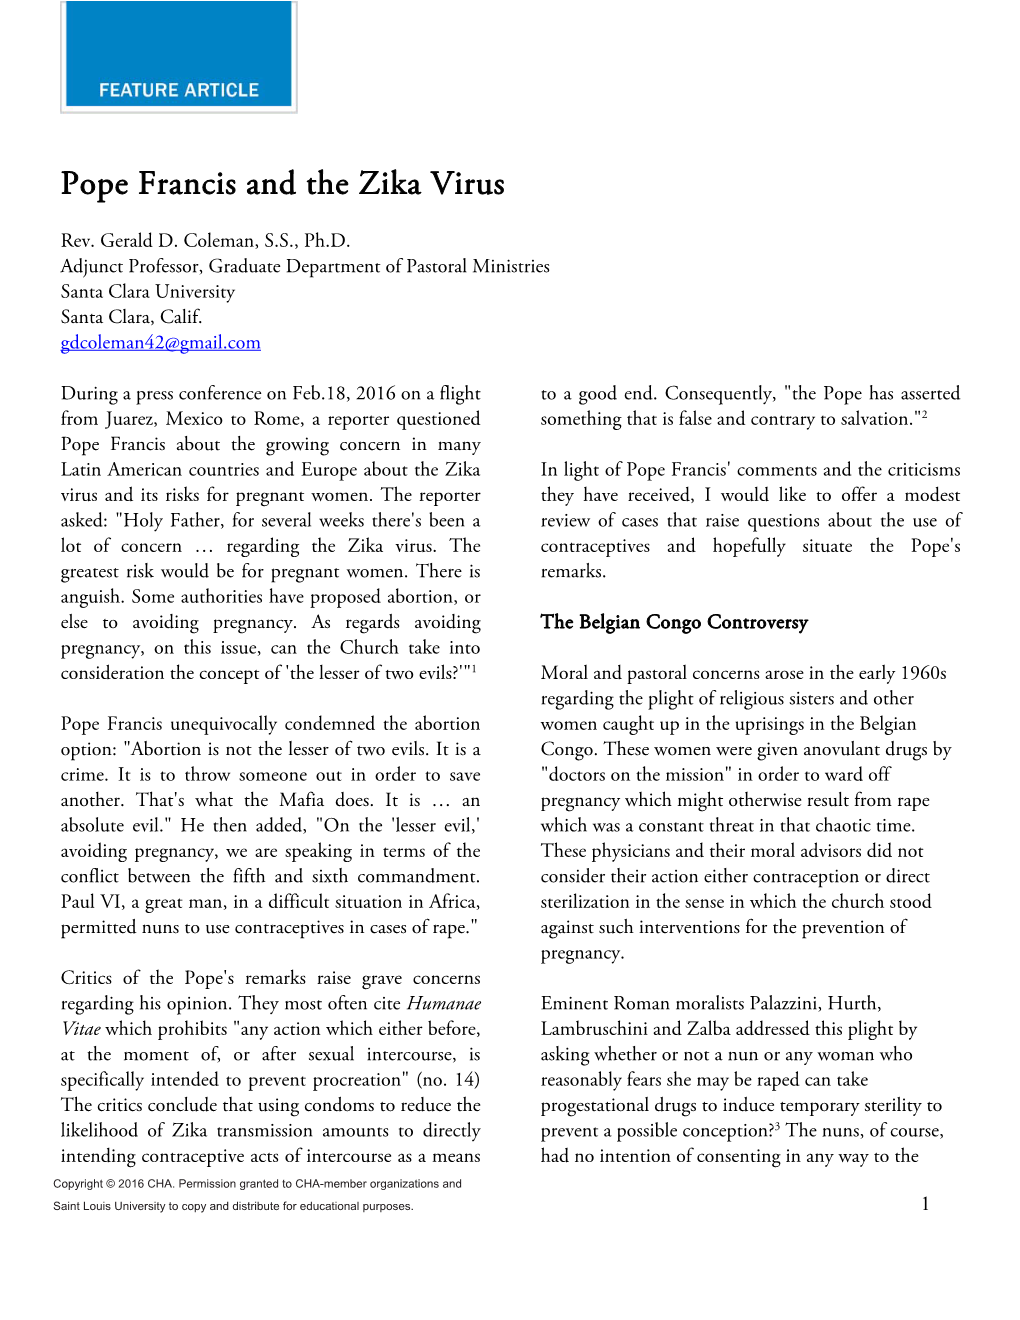 Pope Francis and the Zika Virus